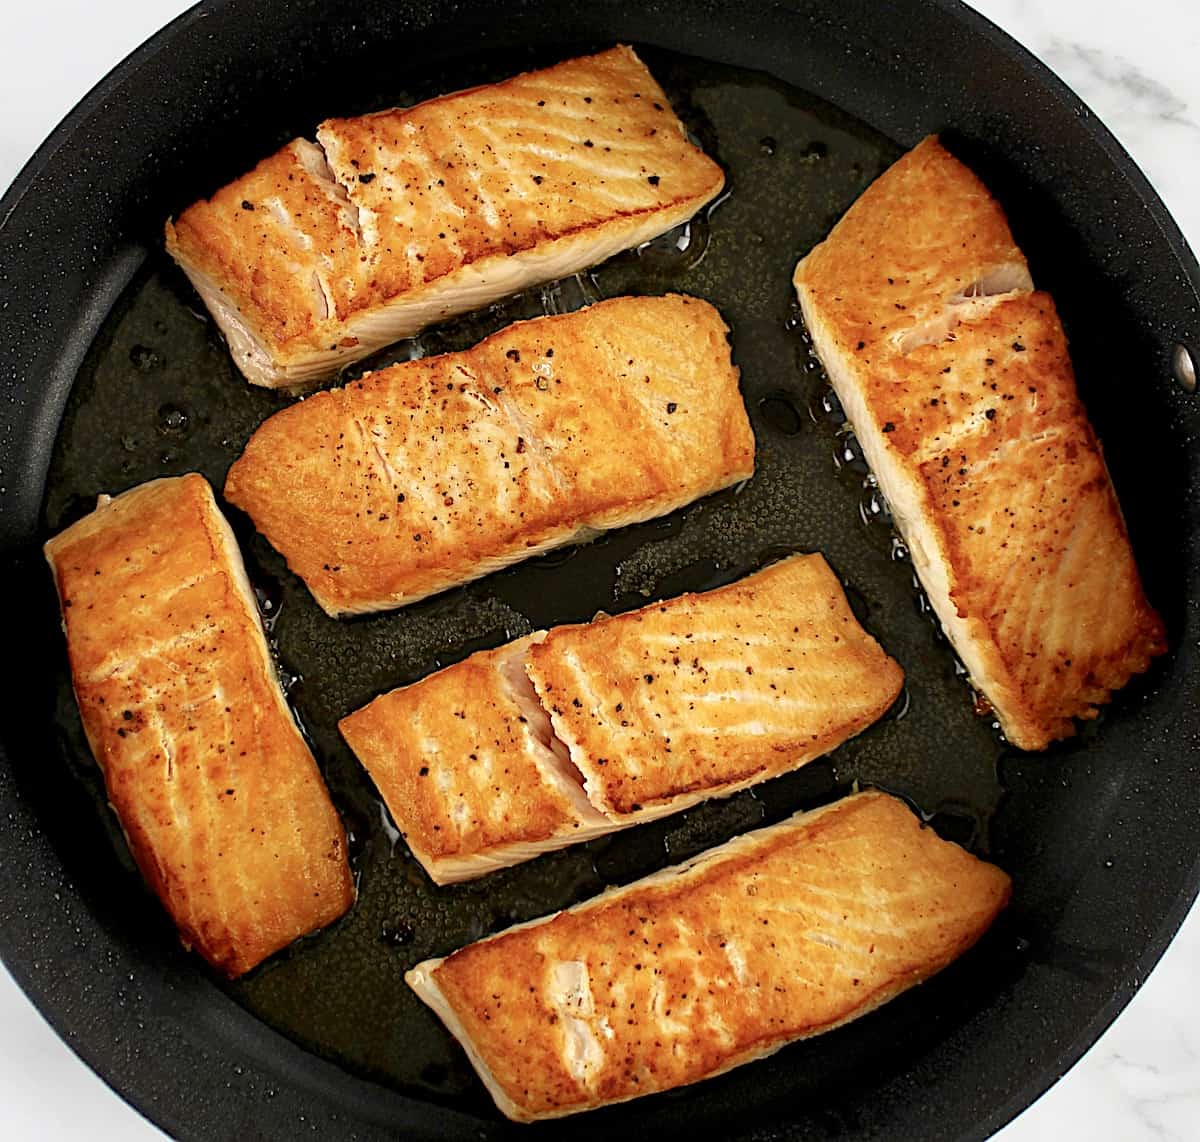 6 pieces of seared salmon in skillet